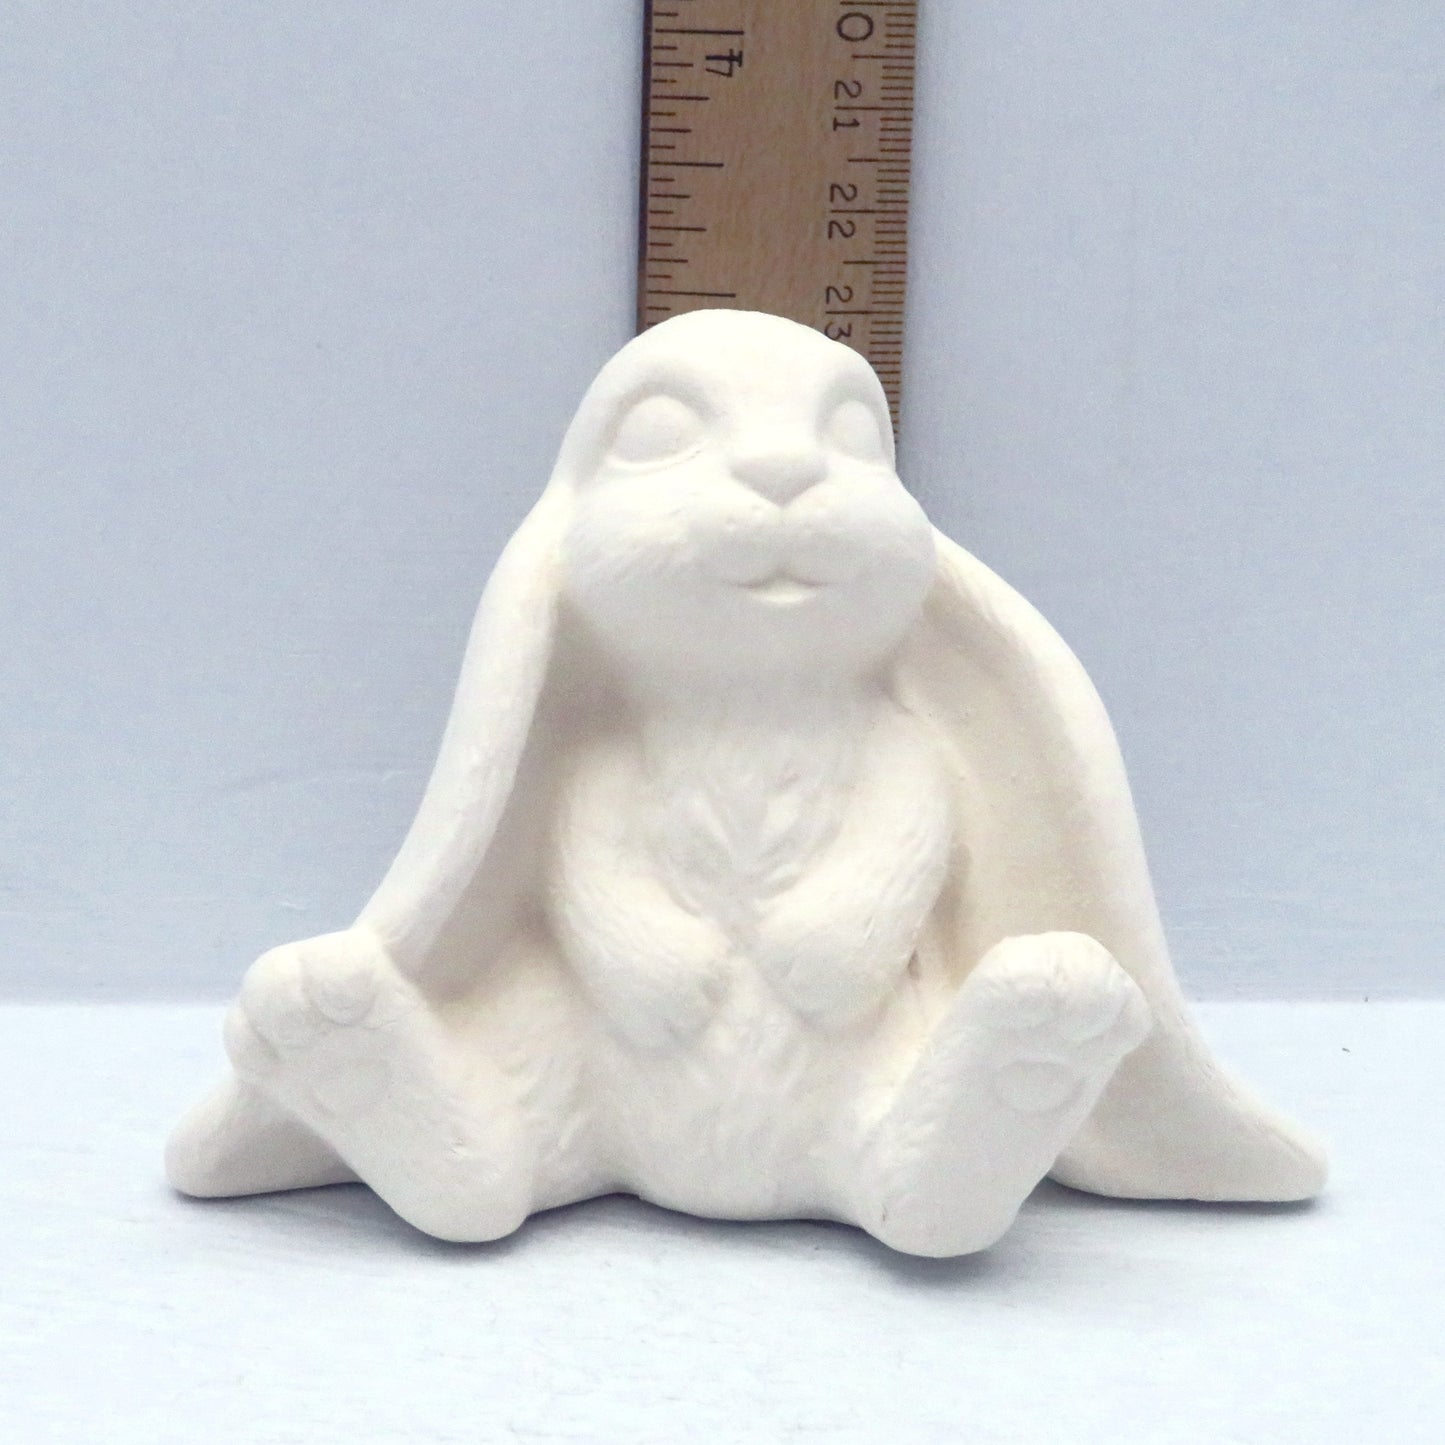 Handmade unpainted lop earred bunny sitting next to a ruler showing it to be approximately 3 inches tall